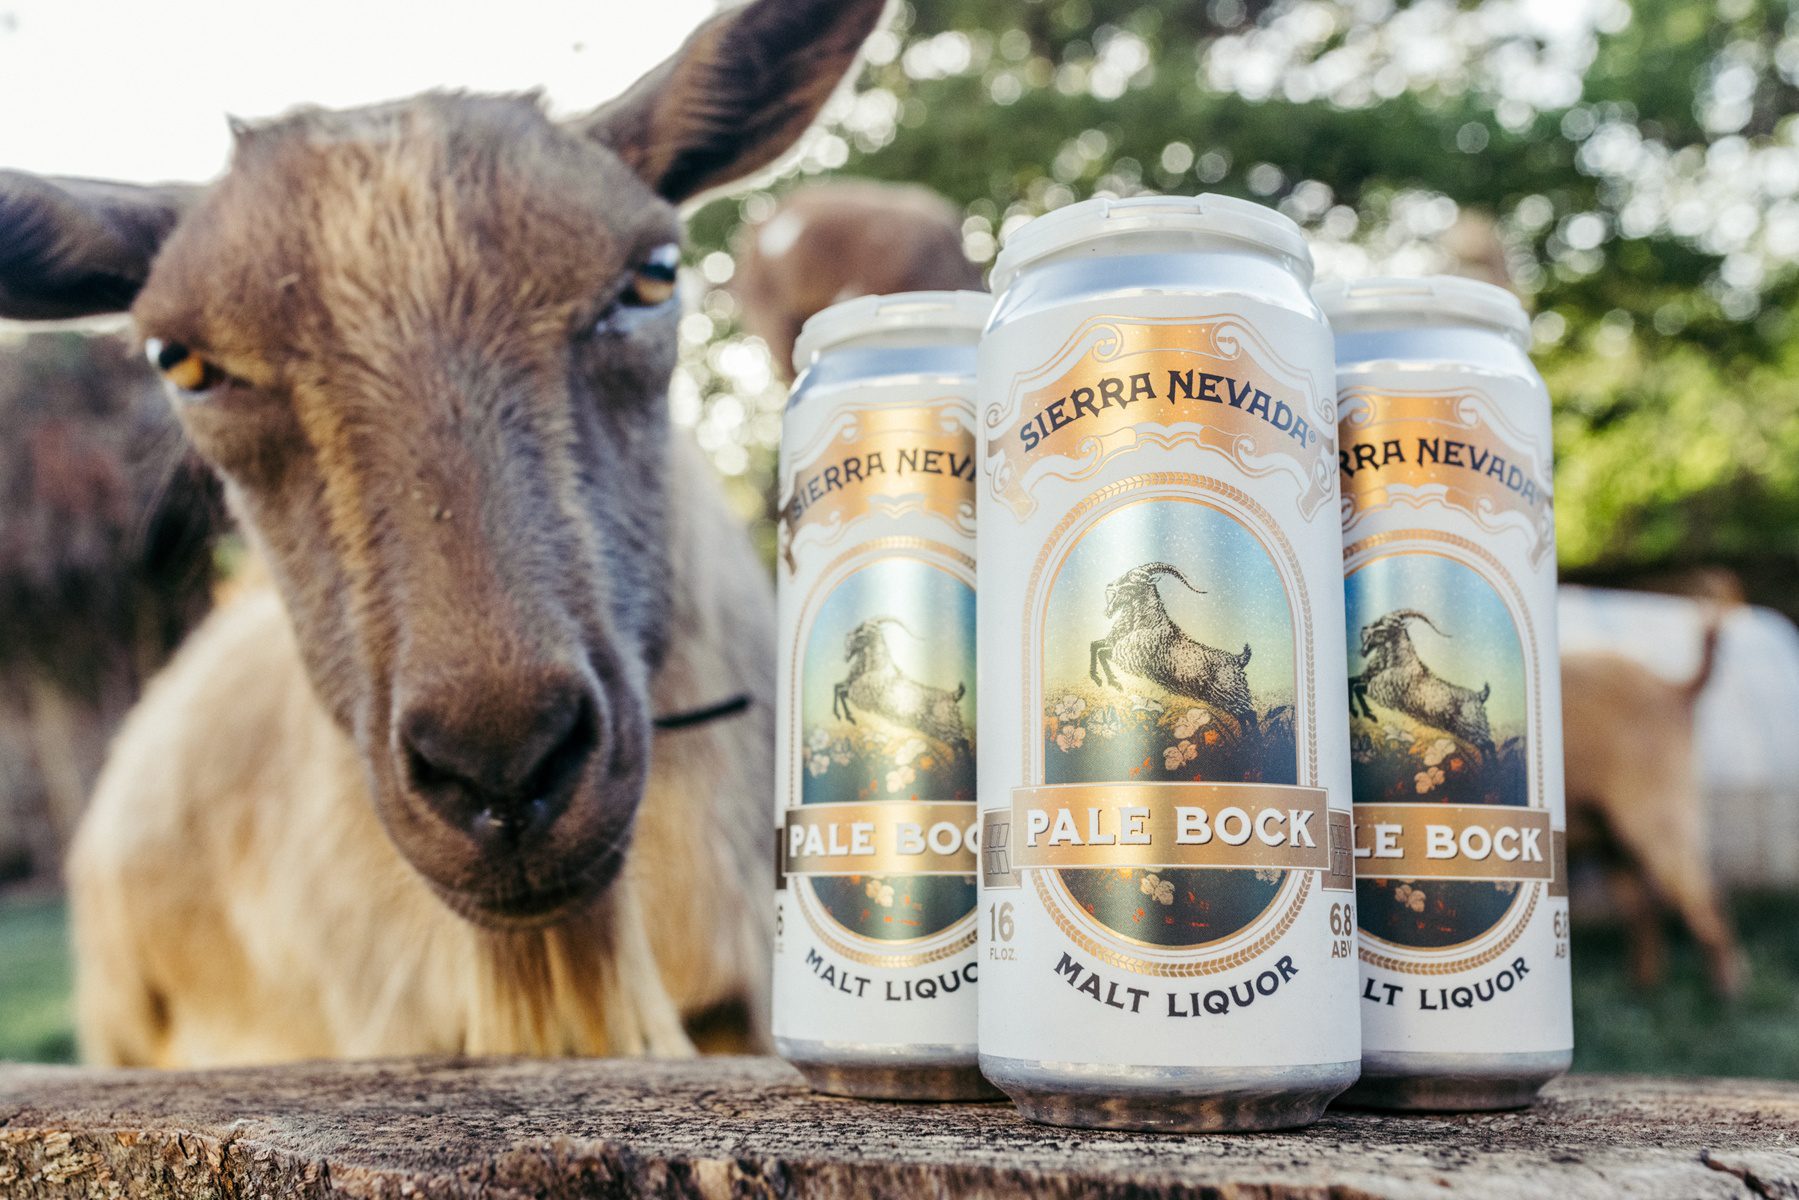 A goat rests its head next to a four-pack of Sierra Nevada Pale Bock beer